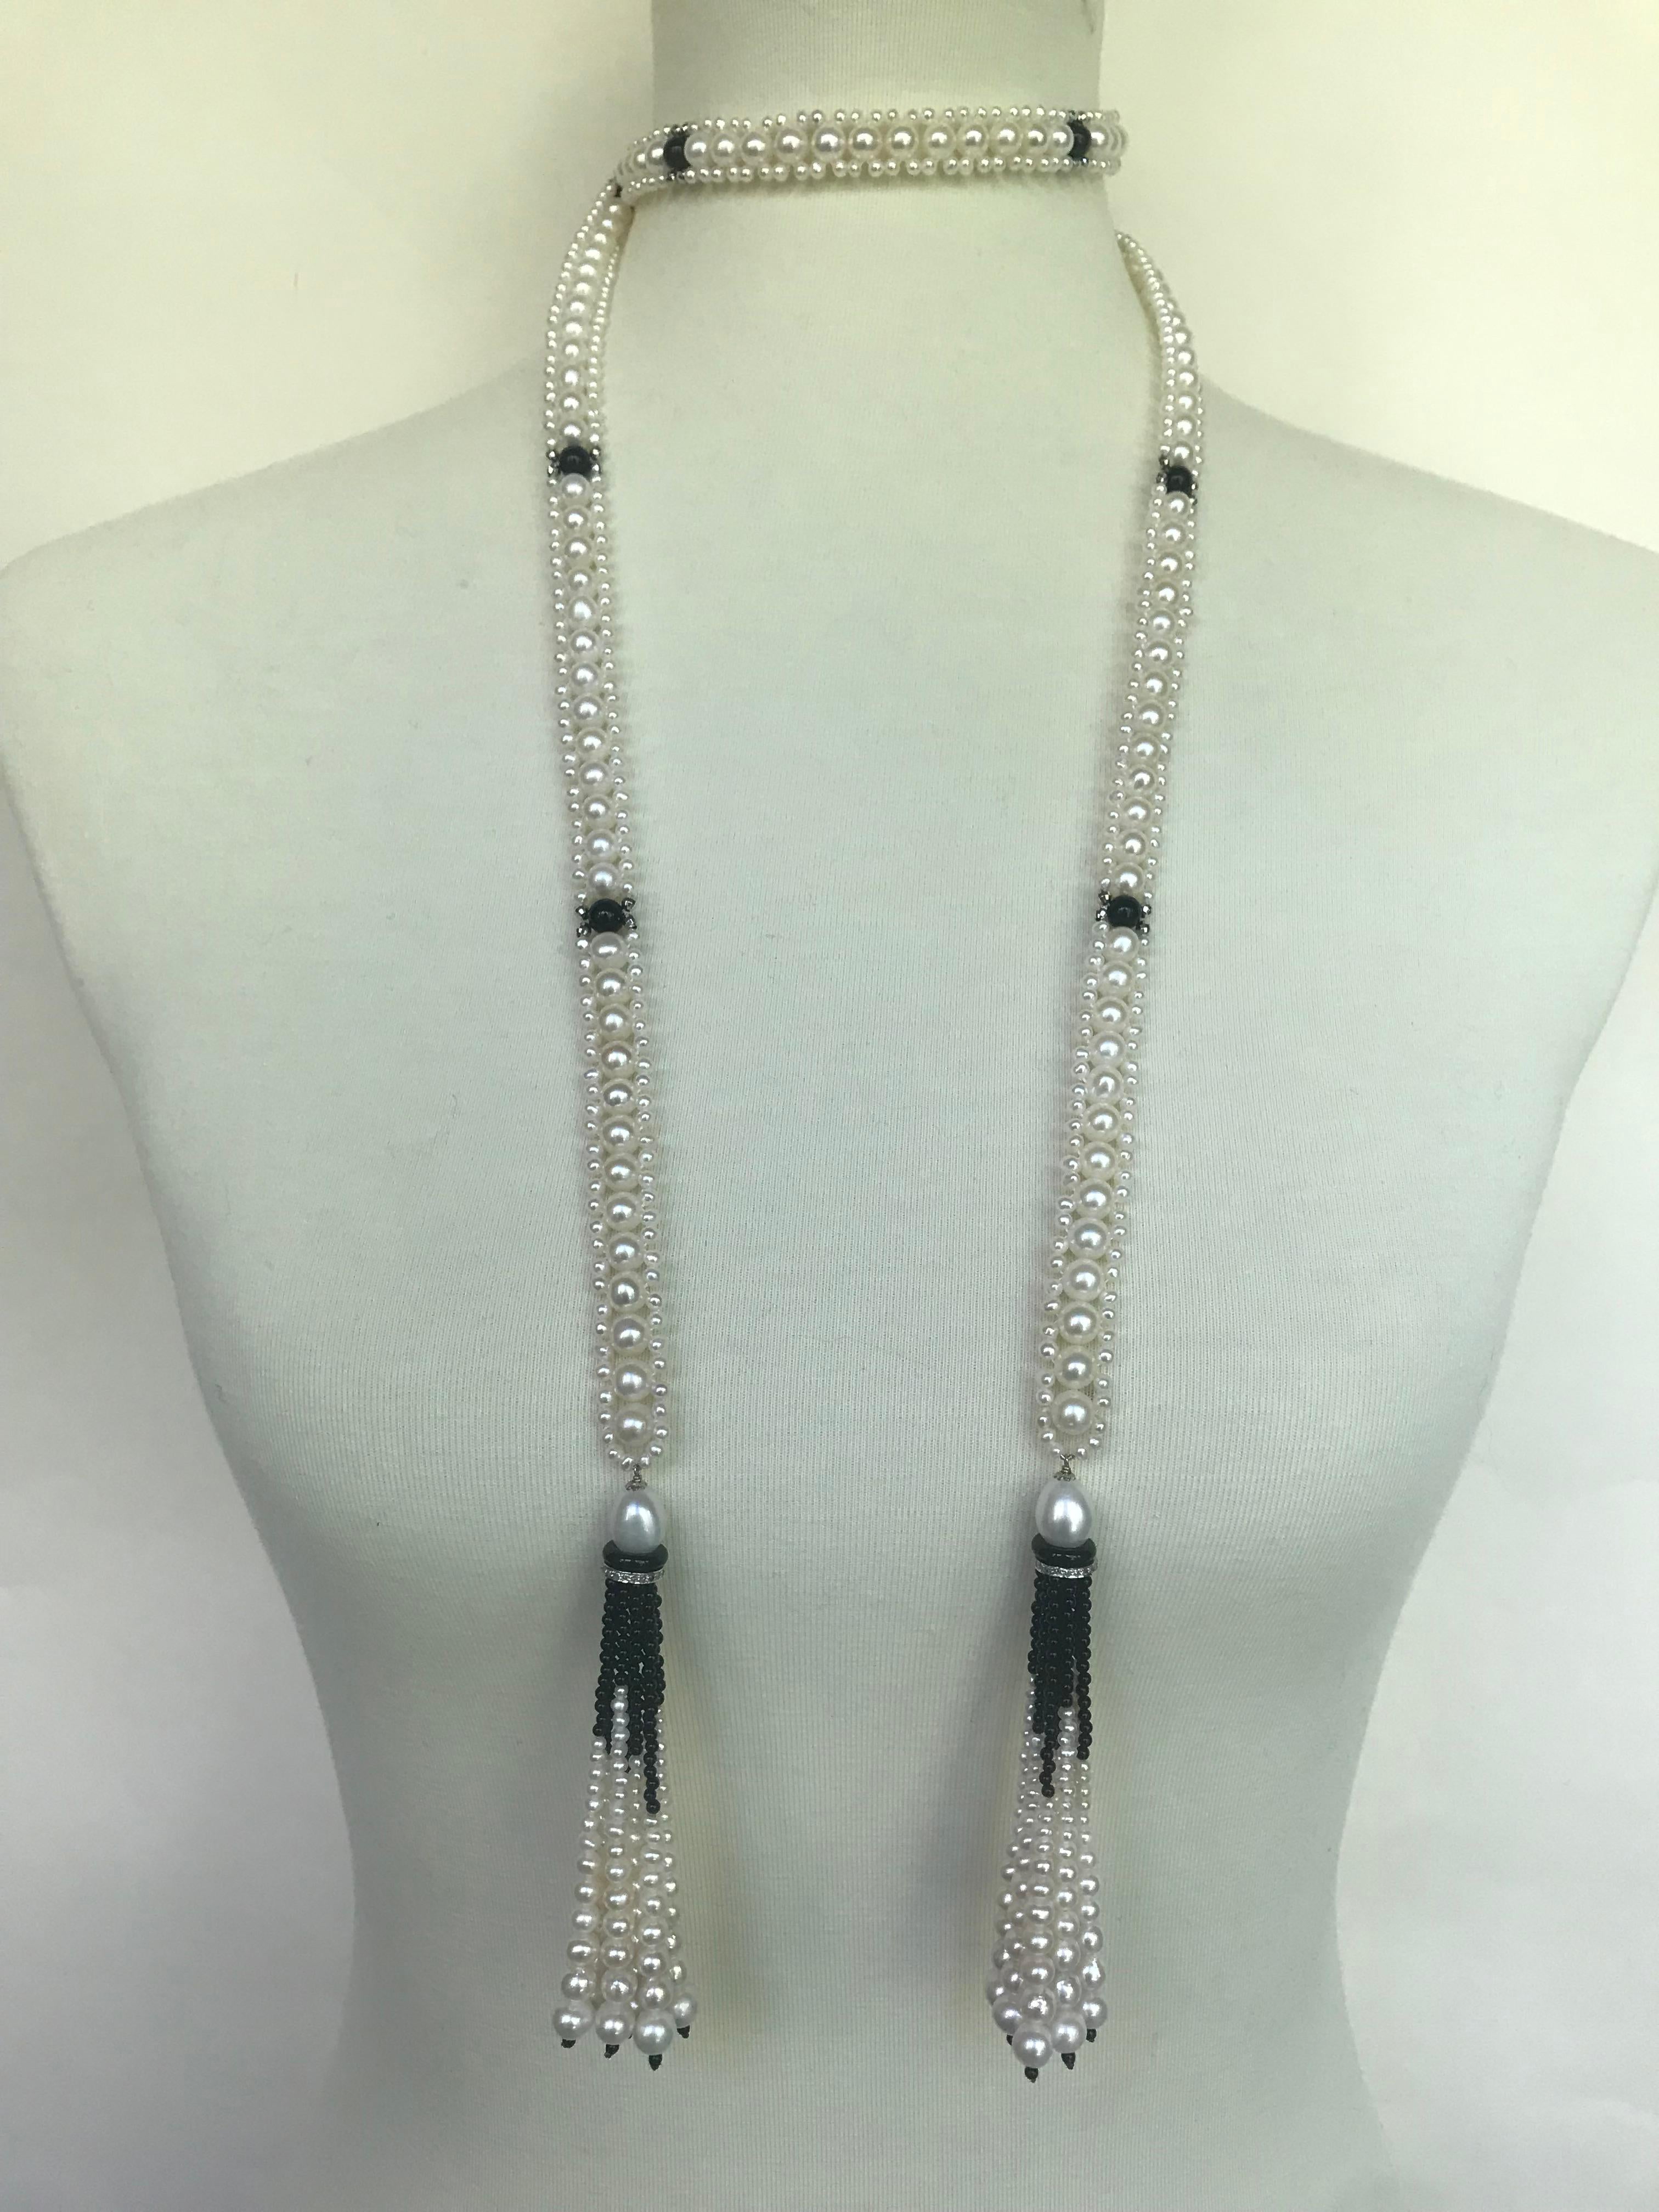 Marina J Woven Pearl Sautoir with Tassels and 14 K White Gold and Onyx beads 7